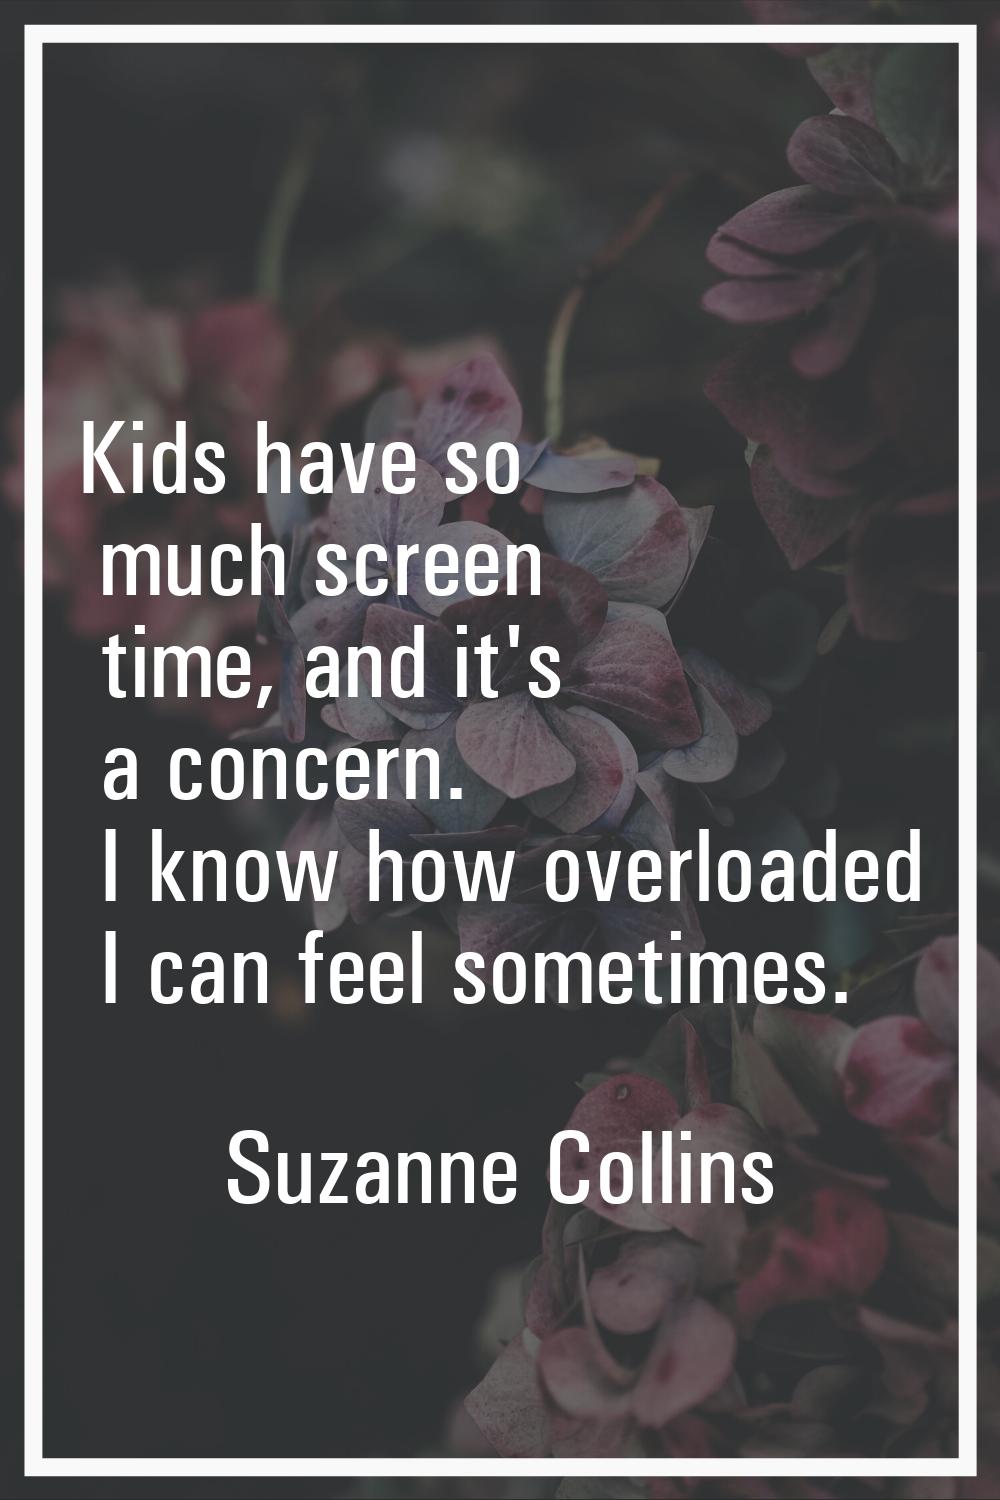 Kids have so much screen time, and it's a concern. I know how overloaded I can feel sometimes.